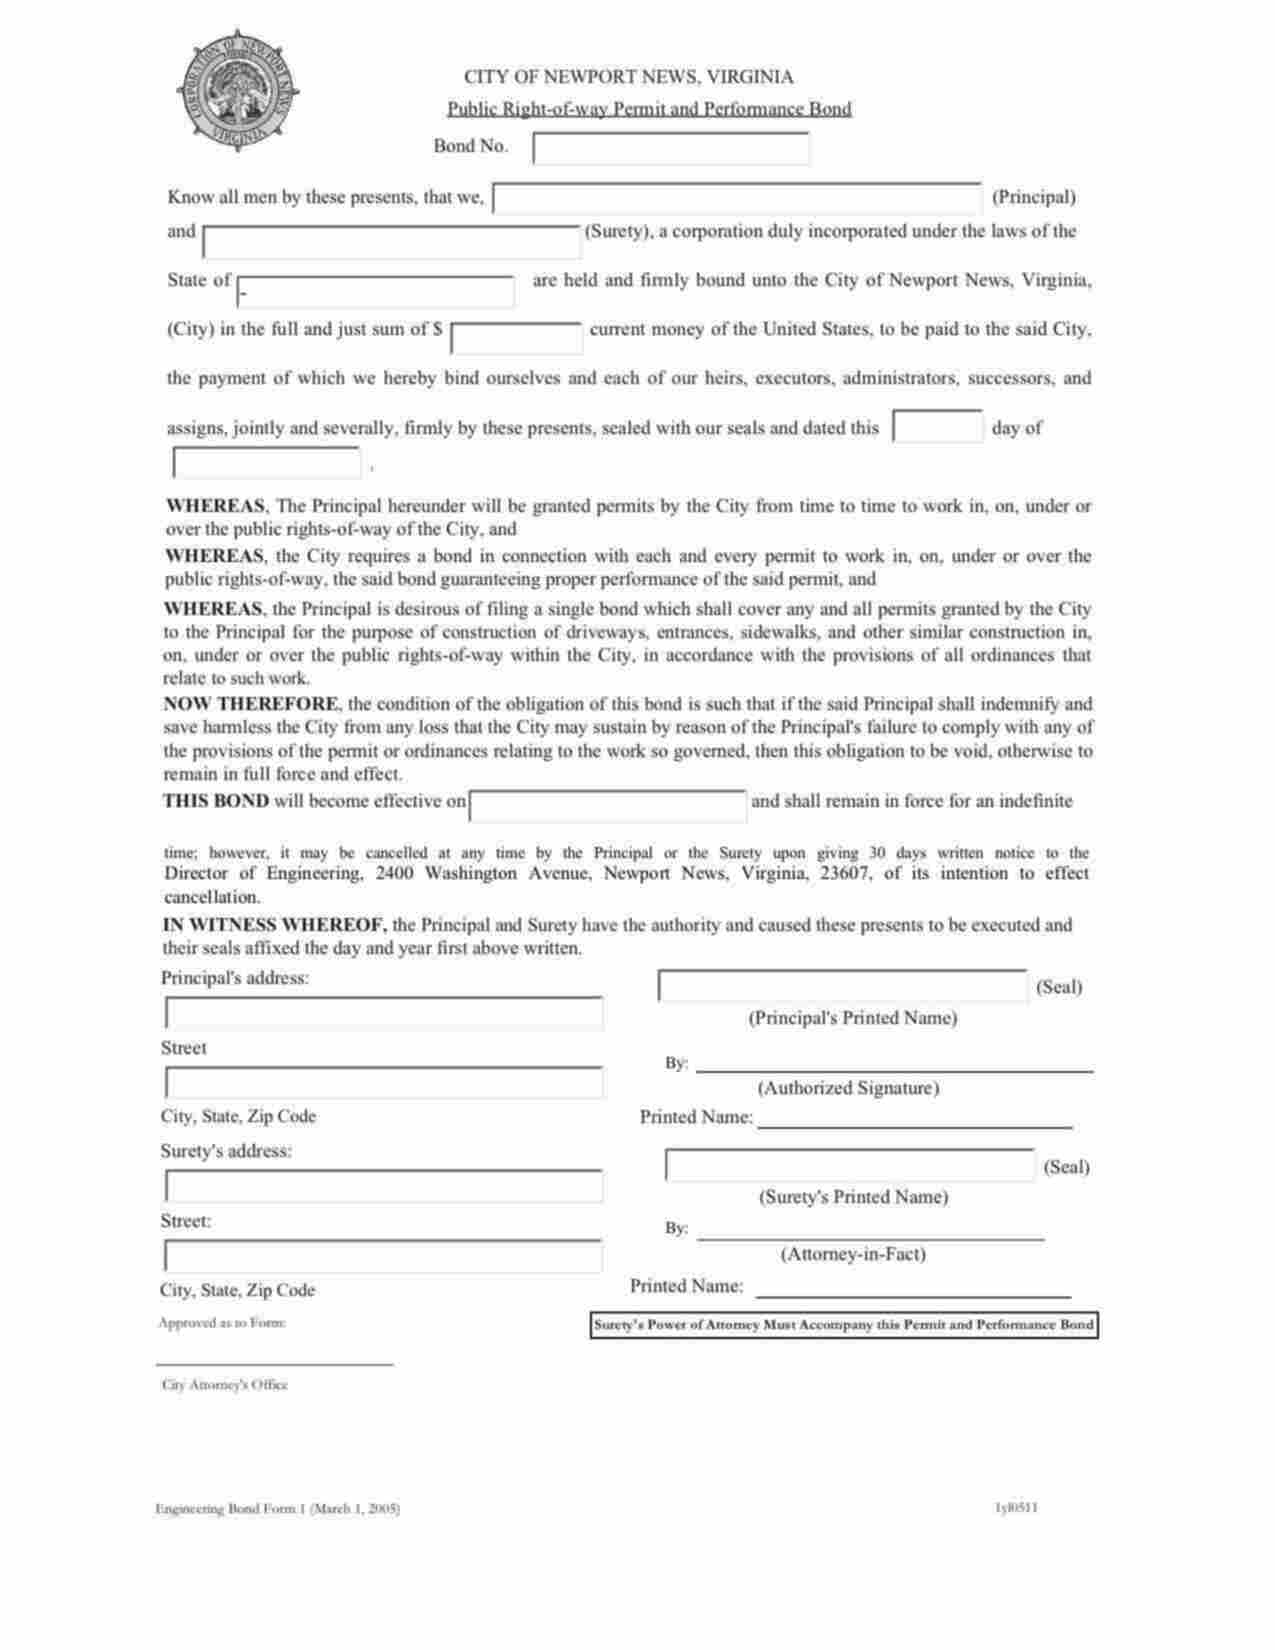 Virginia Public Right-of-Way Permit and Performance Bond Form